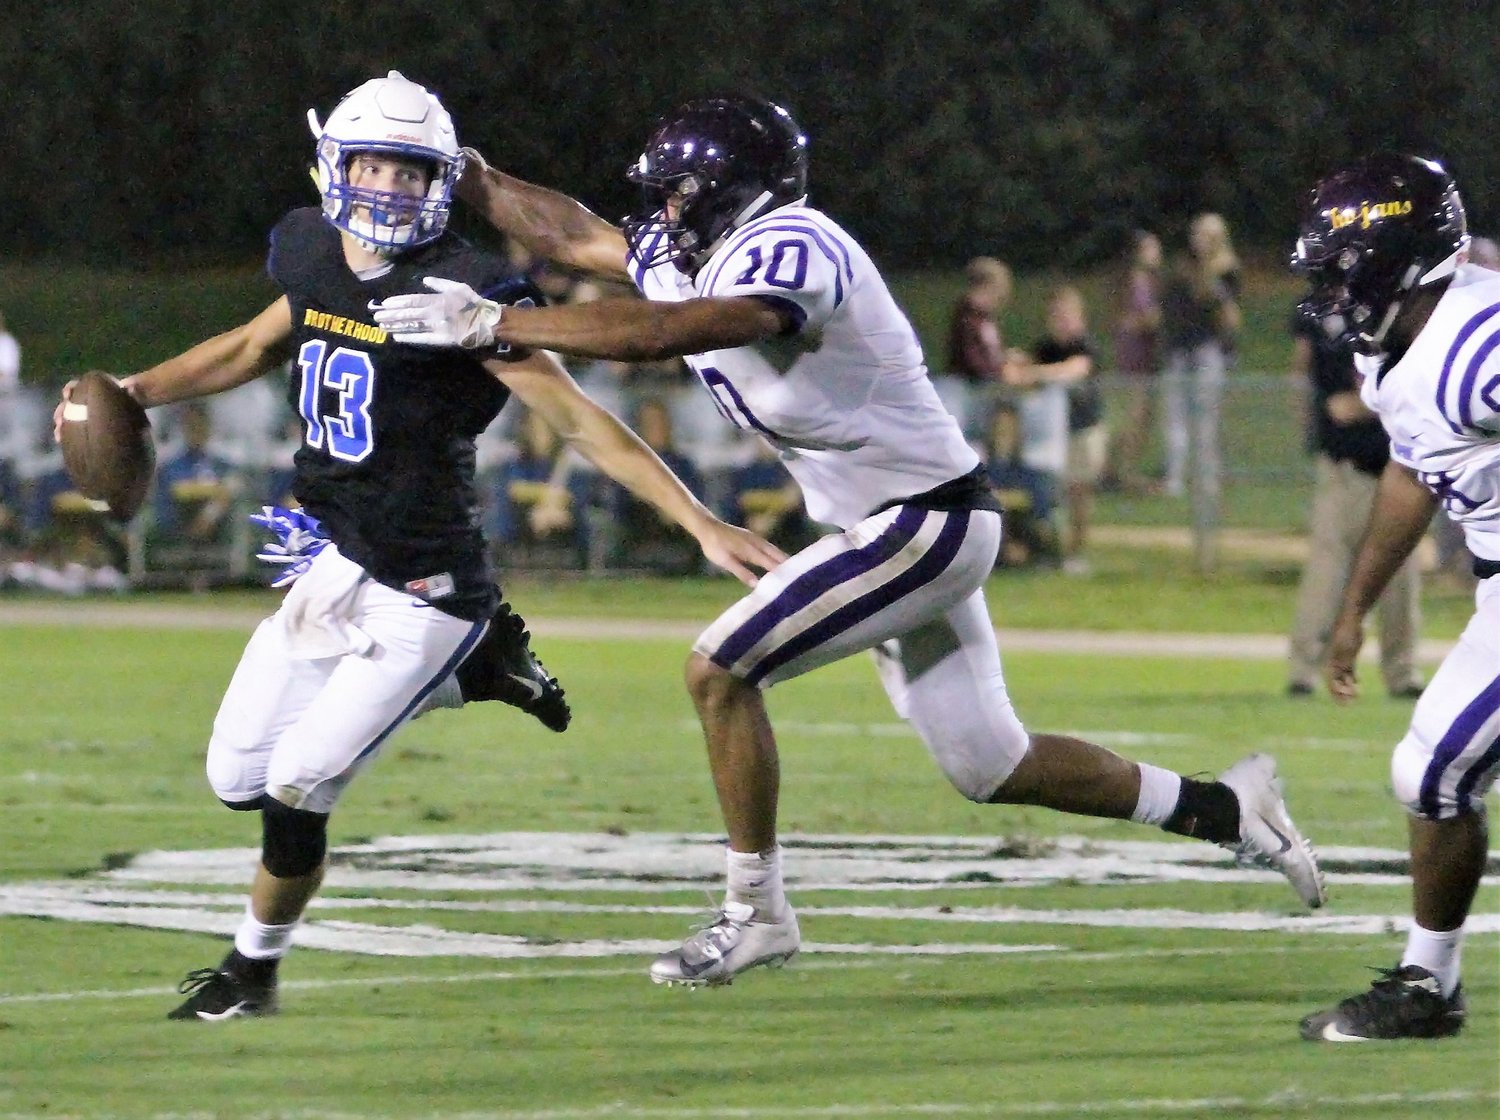 Fairhope quarterback Riley Leonard attempts to escape pressure from Daphne’s Ronnie Cleveland during the region game between the Pirates and Trojans Sept. 28, 2018, on W. C. Majors Field. Leonard, now the quarterback for the Duke Blue Devils, will look for a second win in as many weeks on the road in Northwestern this Saturday.